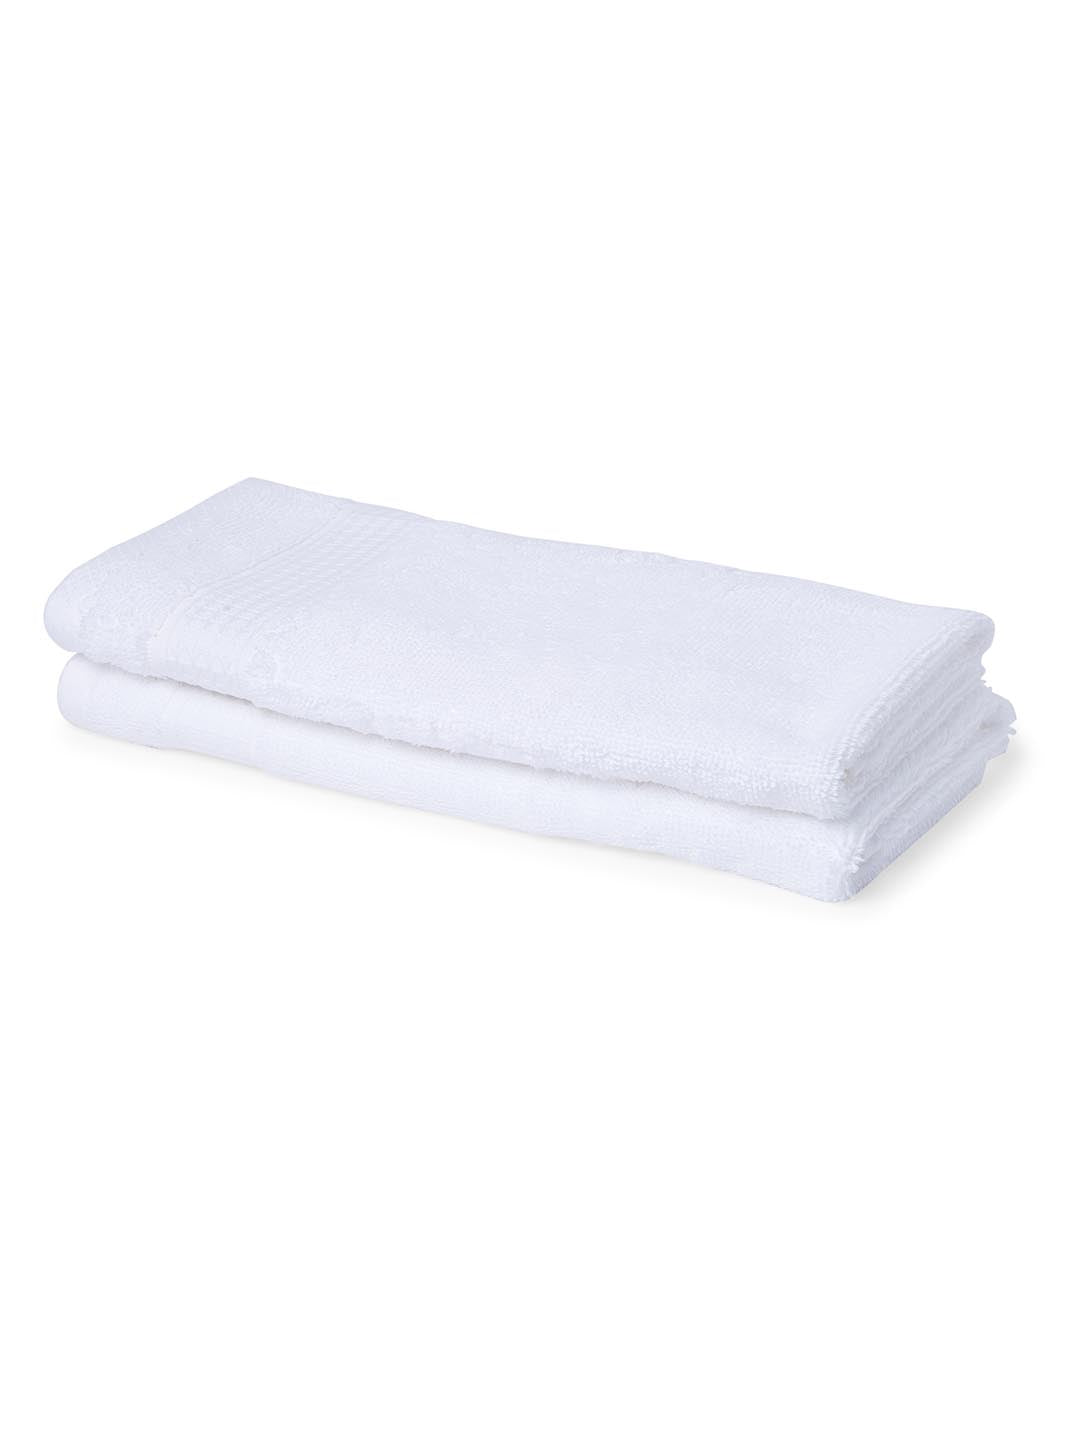 Spaces Organic 2 Pieces Hand Towels (White)